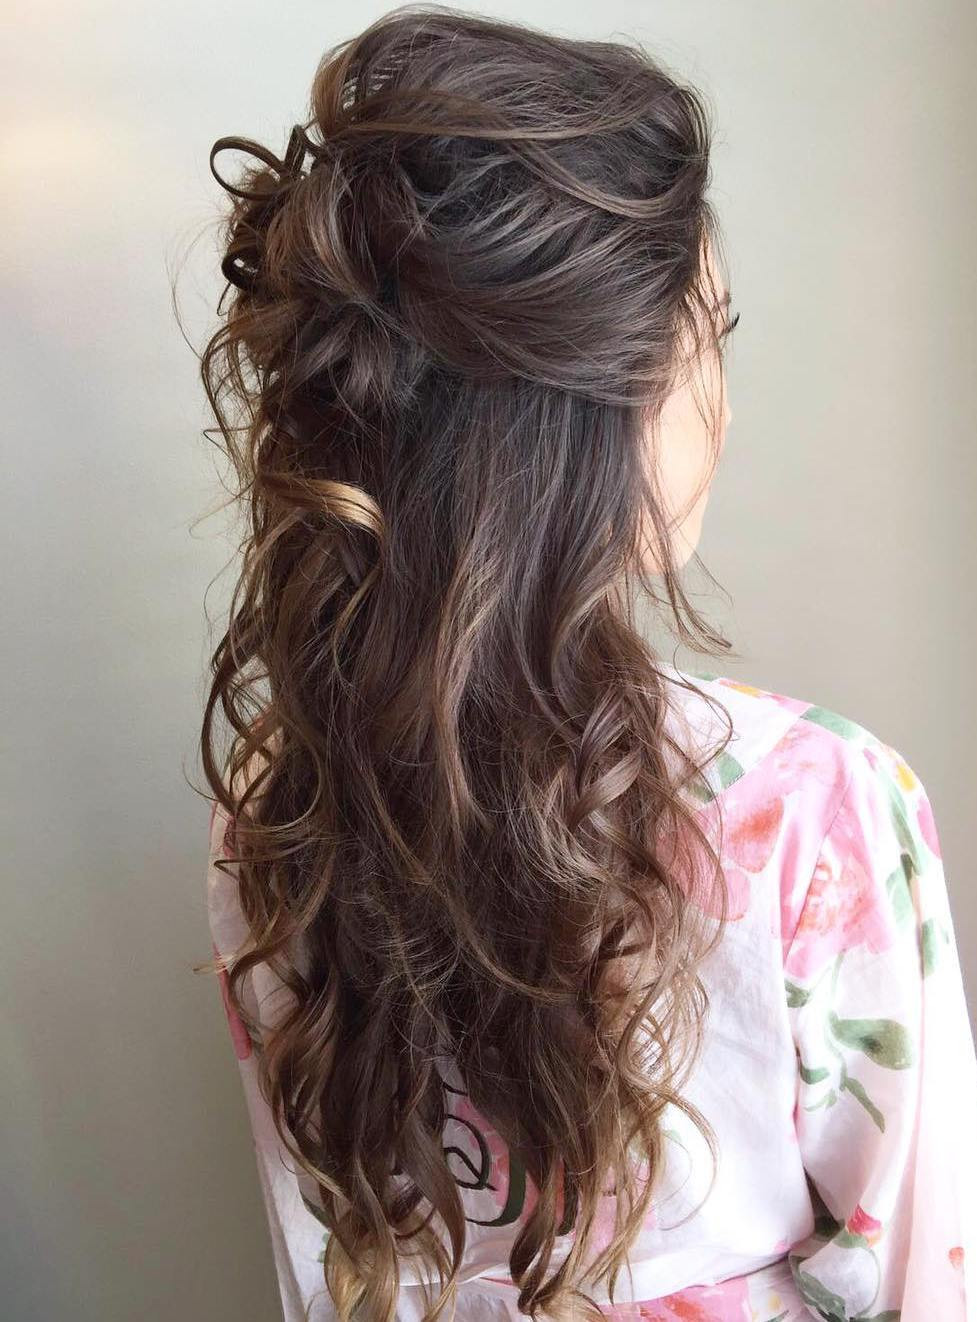 Half Updo Long Hairstyles
 40 Irresistible Hairstyles for Brides and Bridesmaids